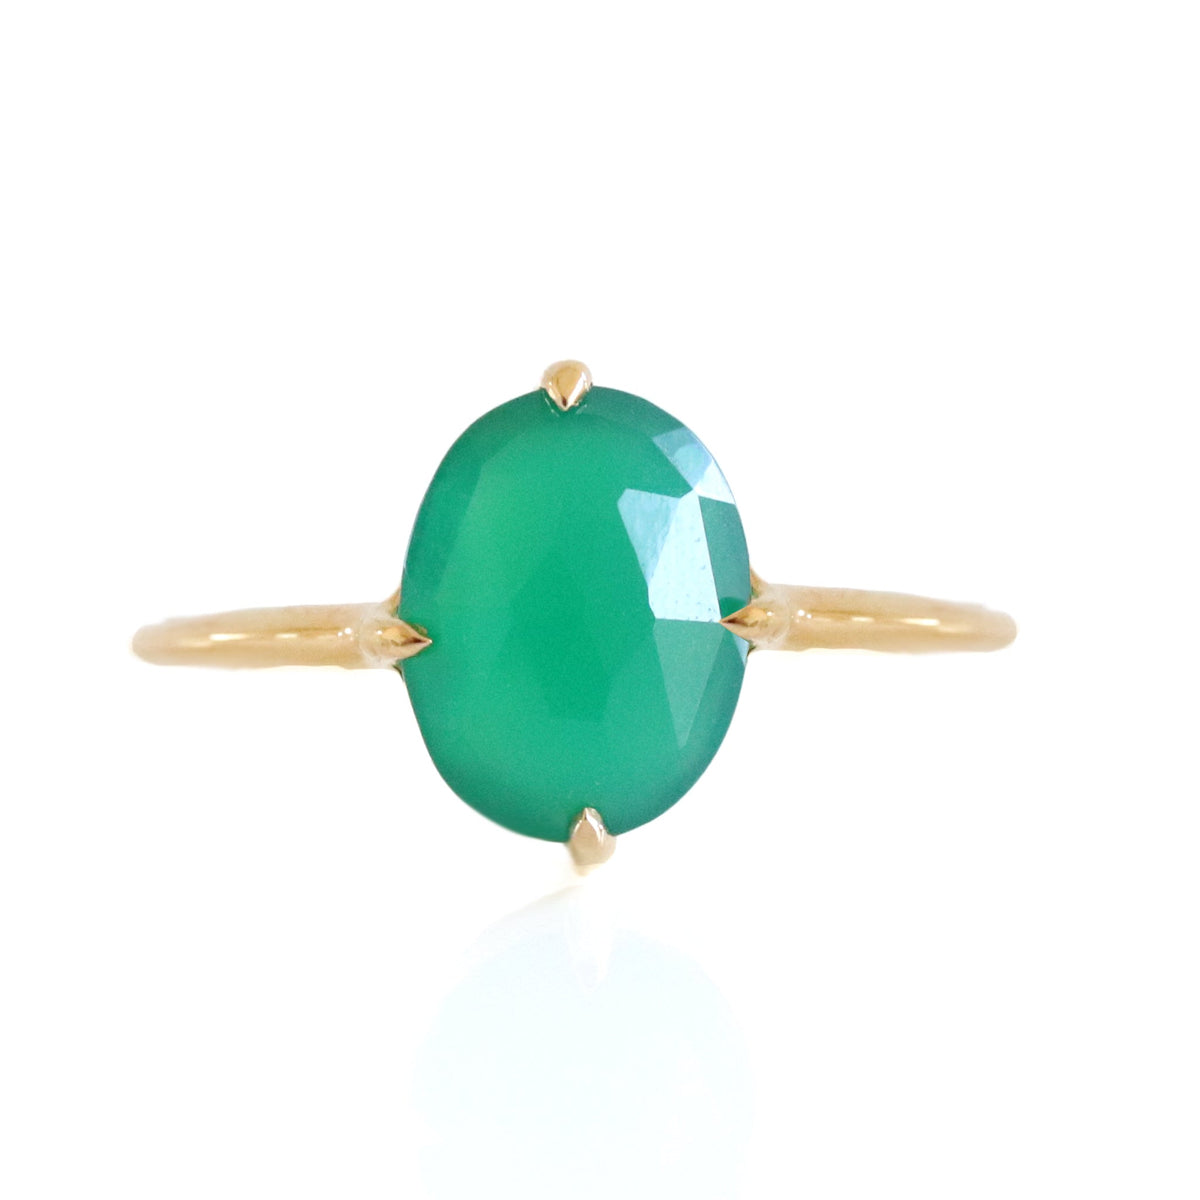 DAY 2 - KIND OVAL RING - EMERALD GREEN ONYX &amp; GOLD - SO PRETTY CARA COTTER